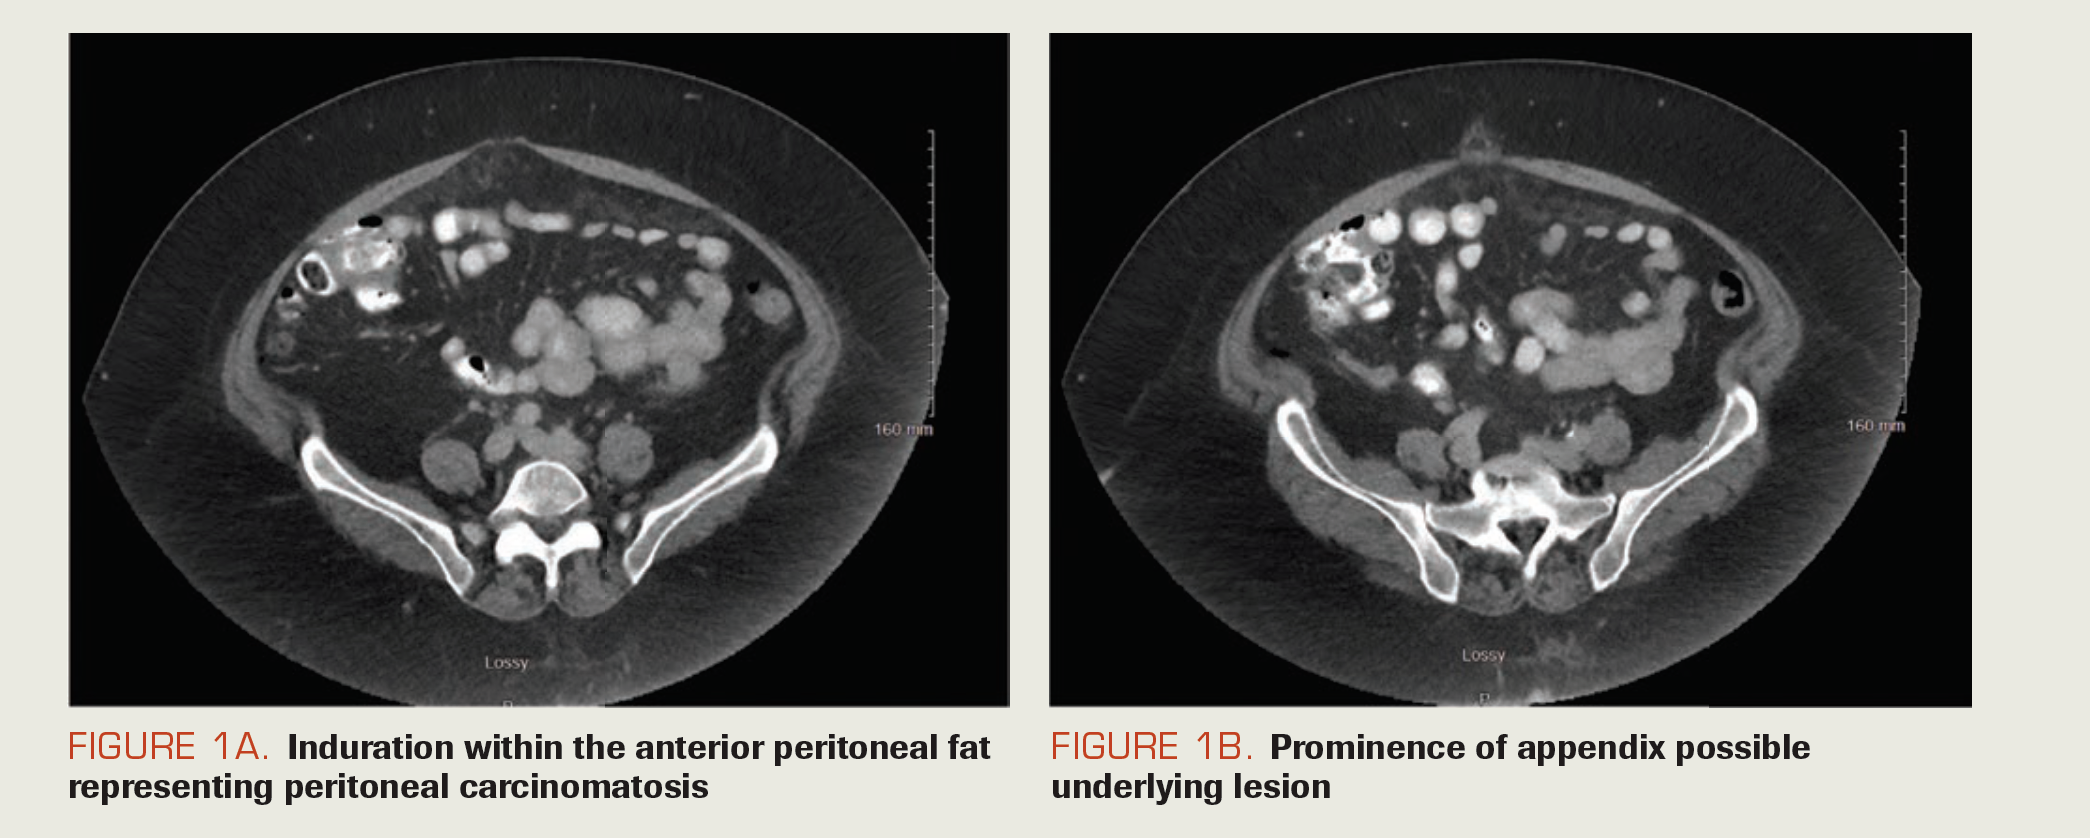 FIGURE 1A. Induration within the anterior peritoneal fat representing peritoneal carcinomatosis

FIGURE 1B. Prominence of appendix possible underlying lesion